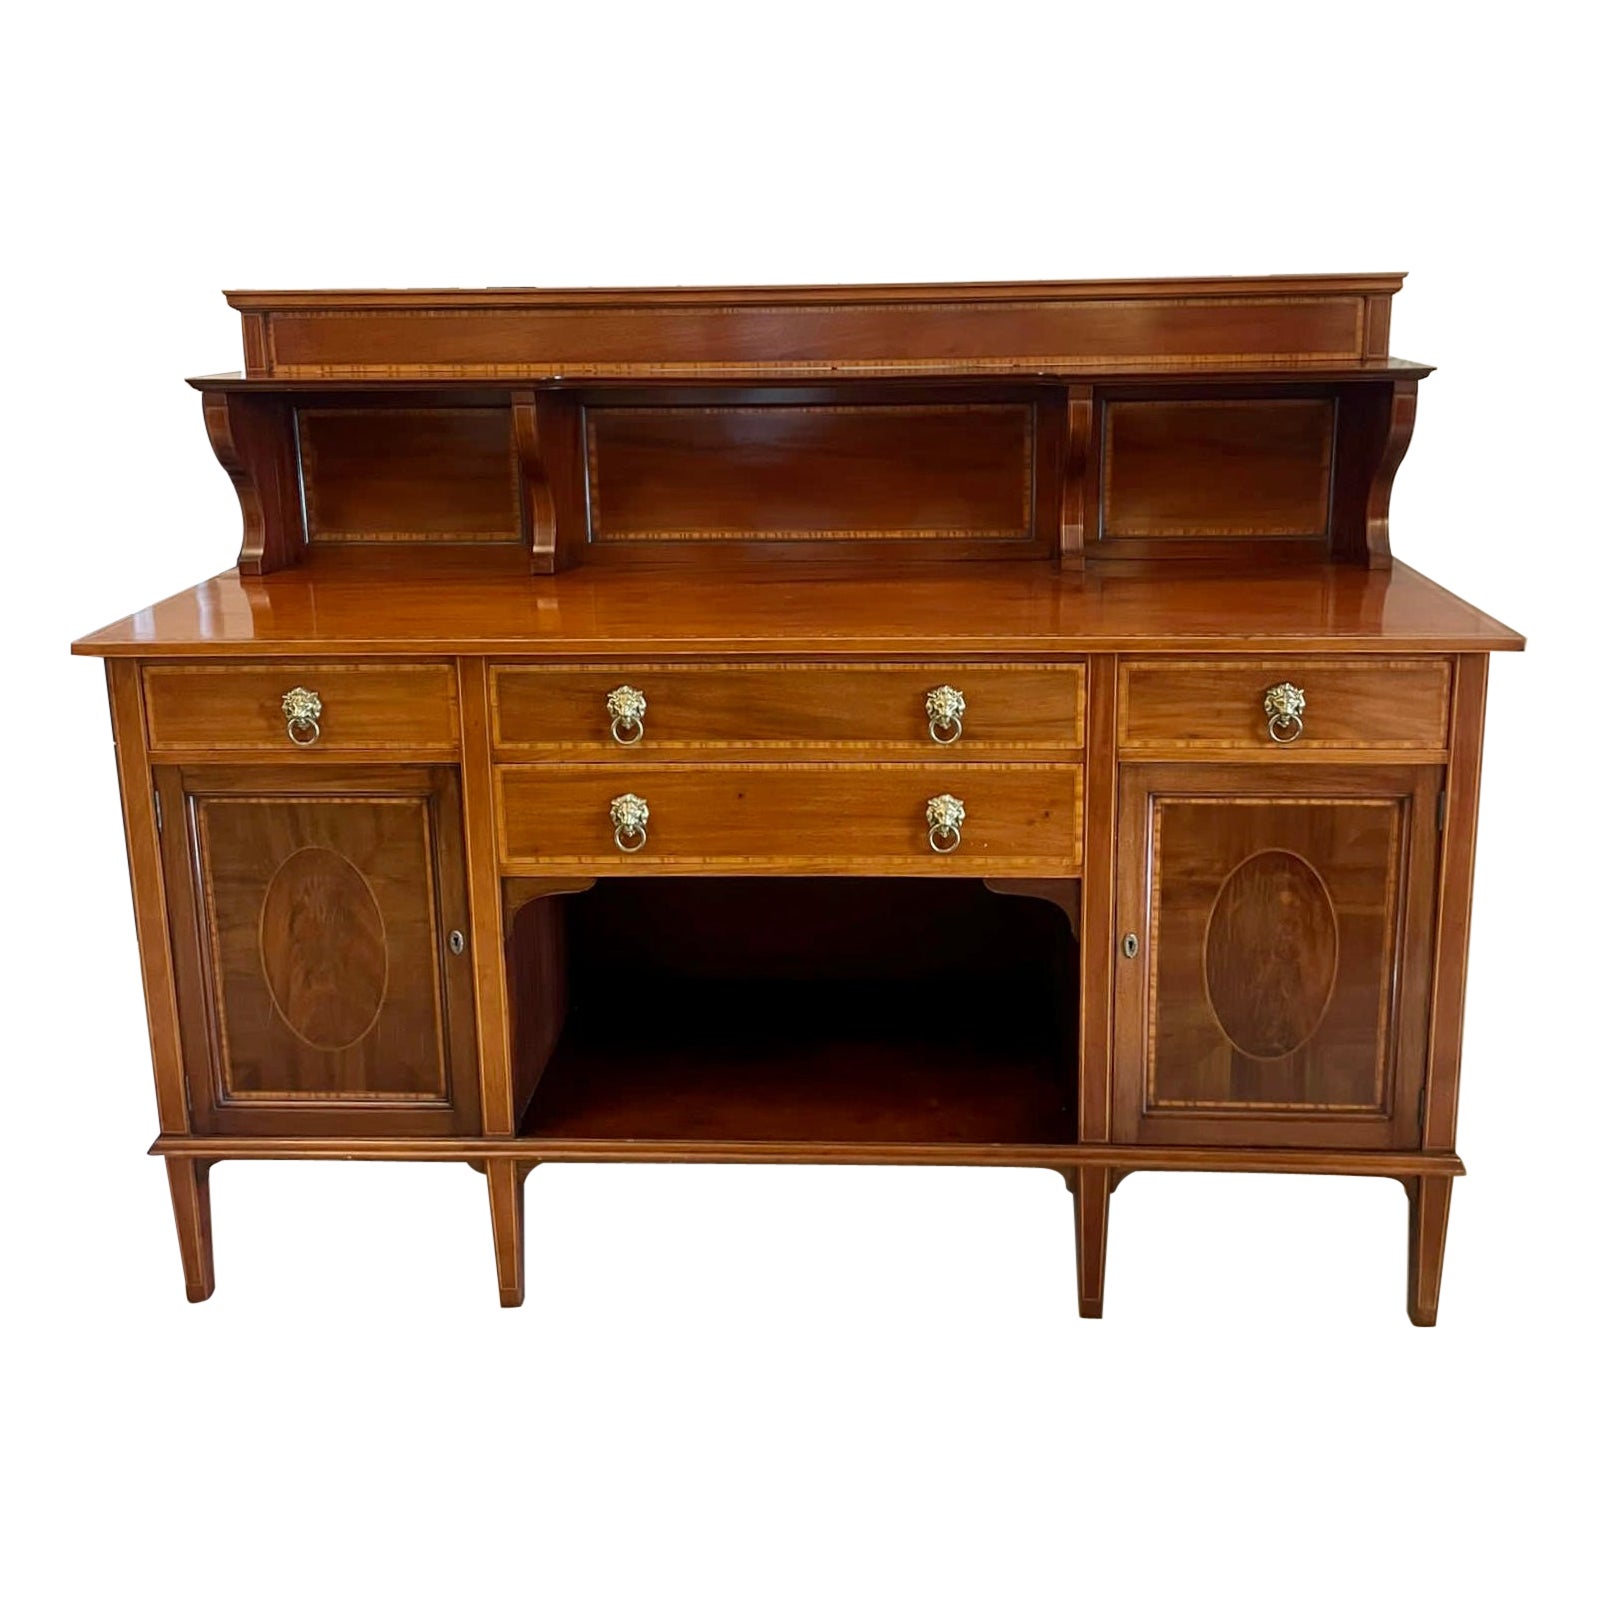 Superb Quality Large Antique Edwardian Mahogany Inlaid Sideboard  For Sale